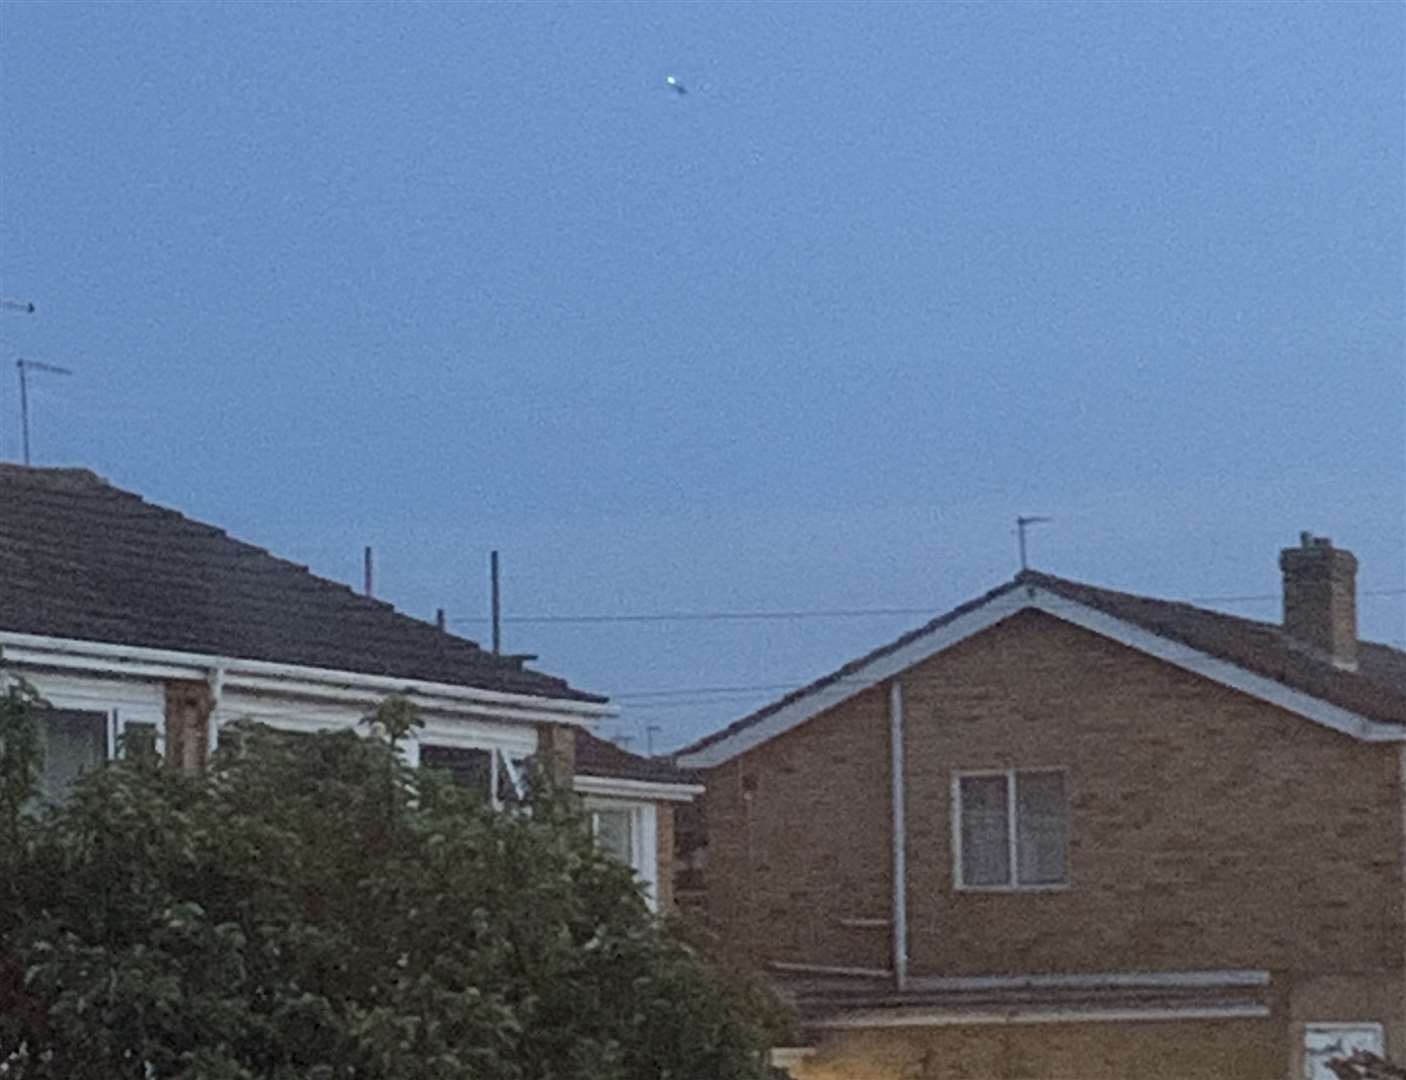 A police helicopter in the distance searching over the Mill Hill area of Deal